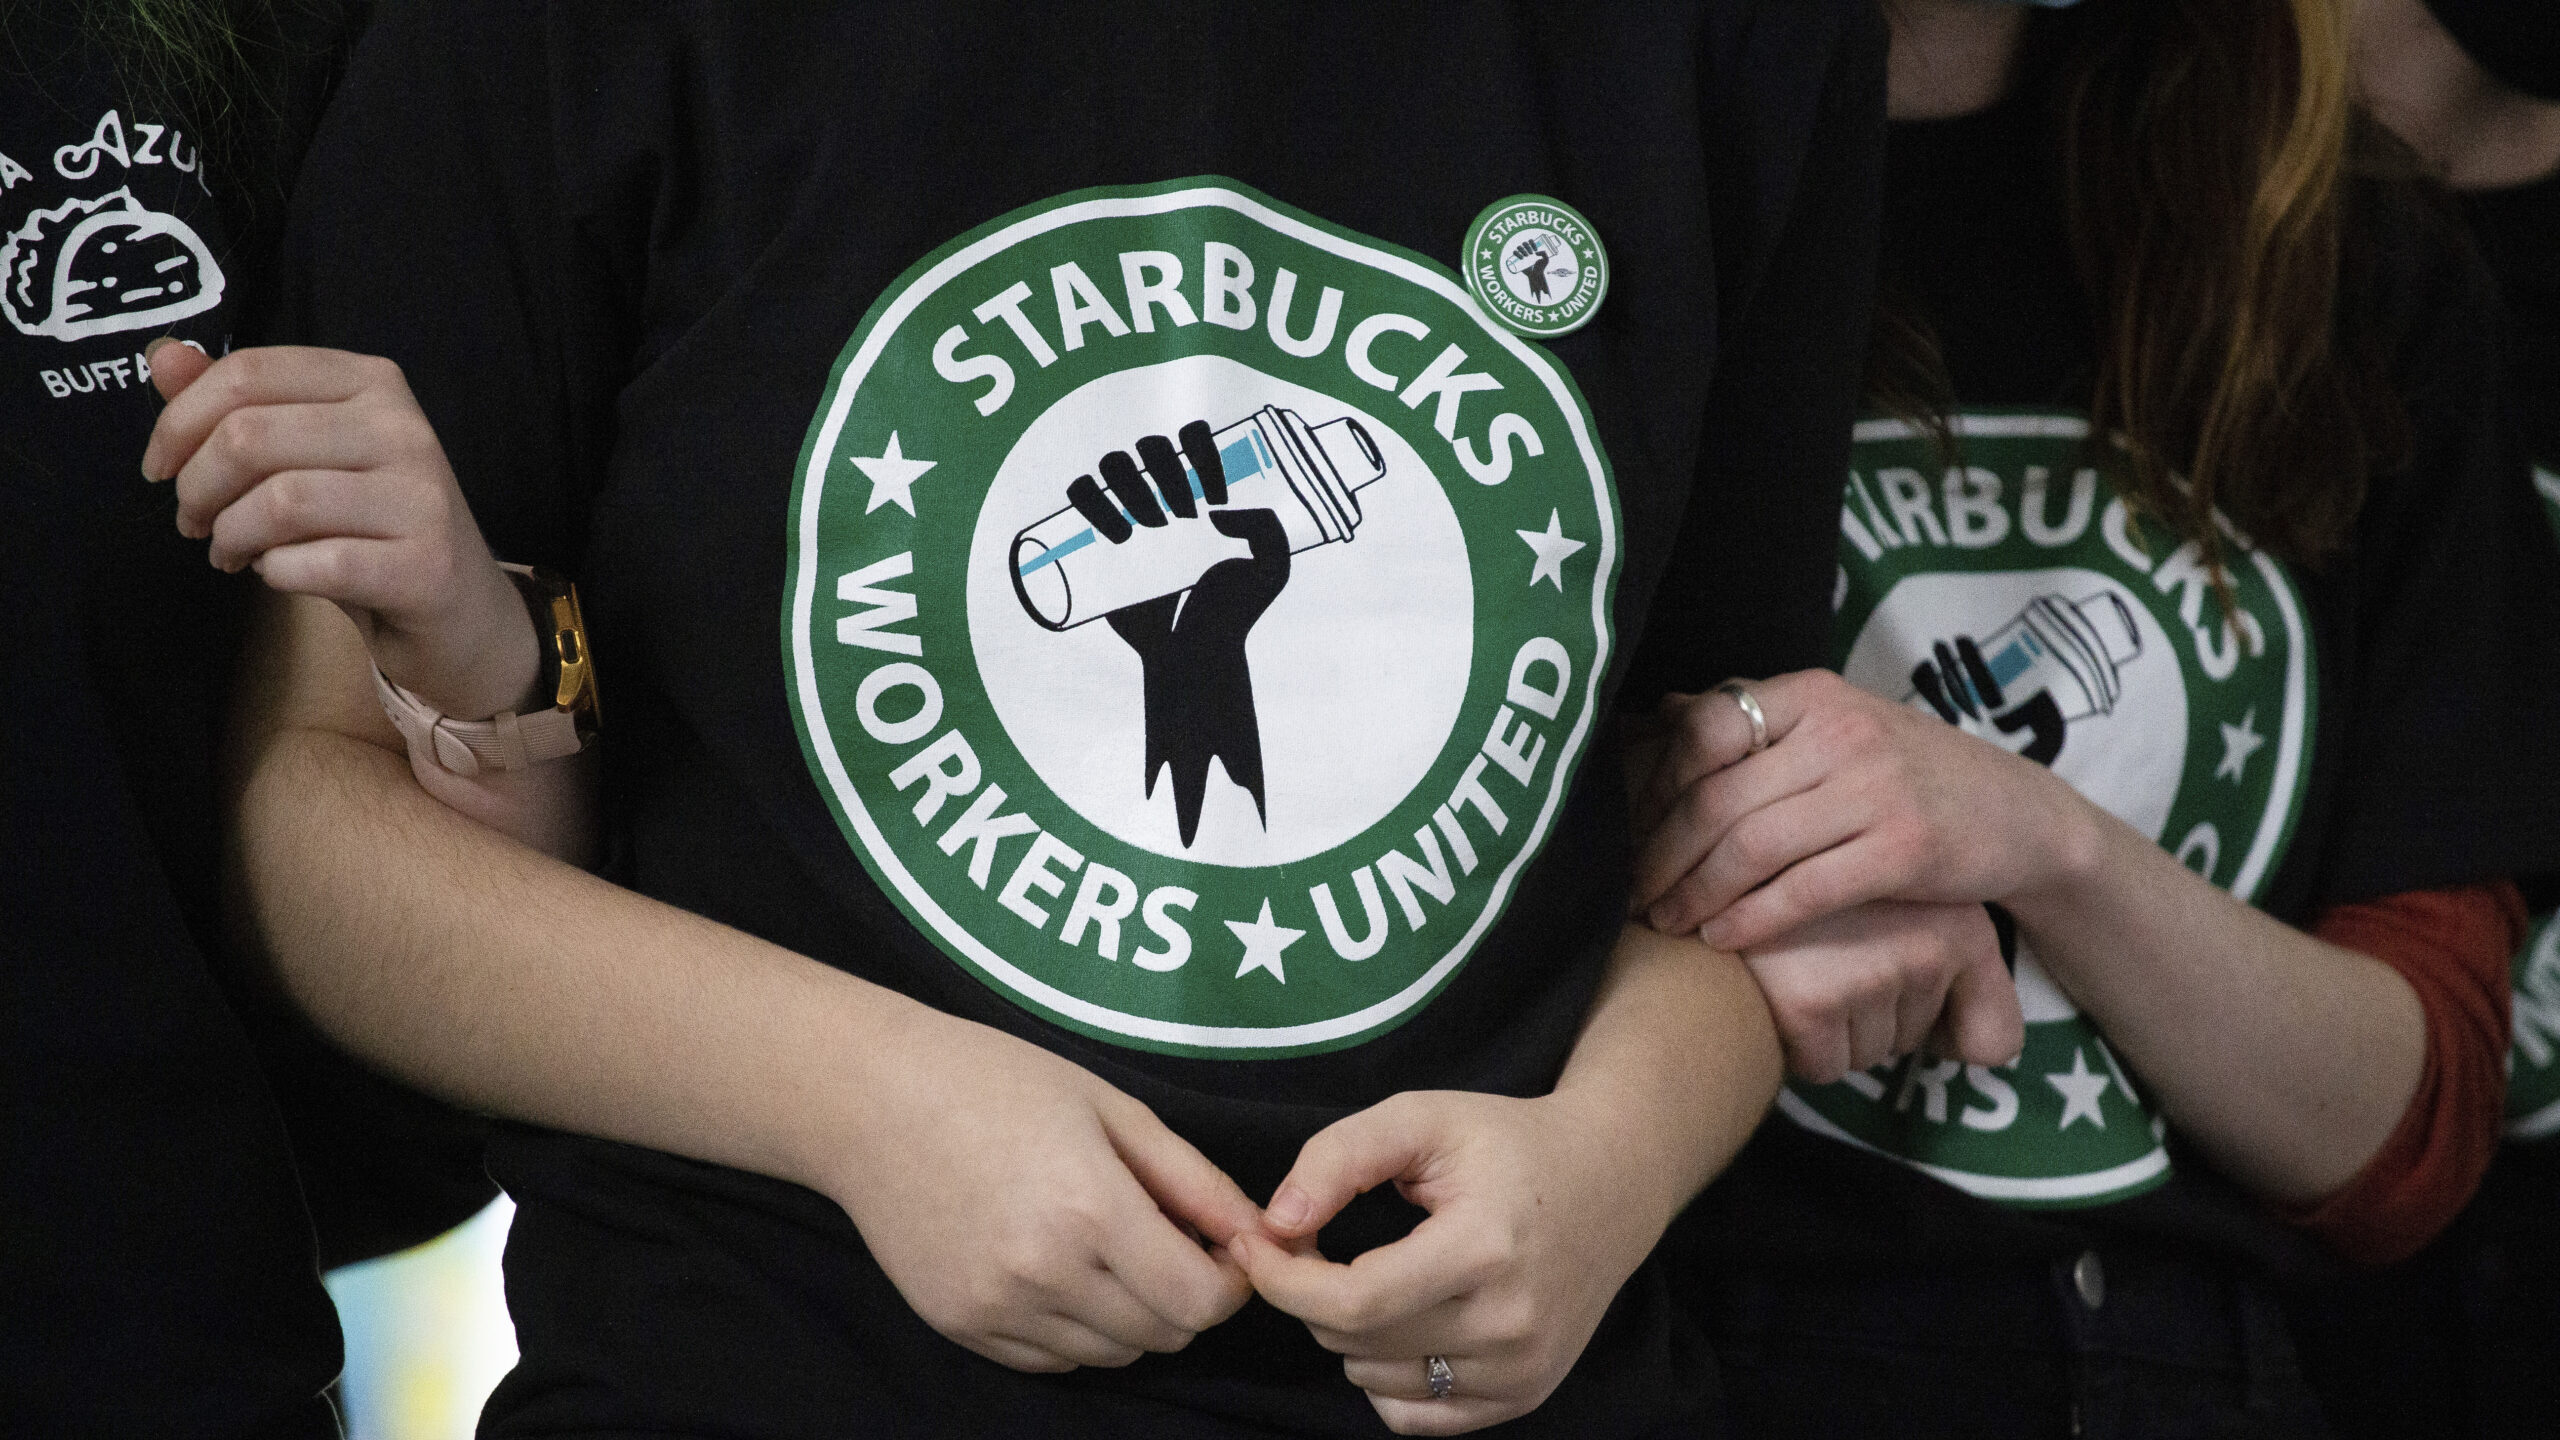 starbucks workers wear shirts from starbucks workers union...